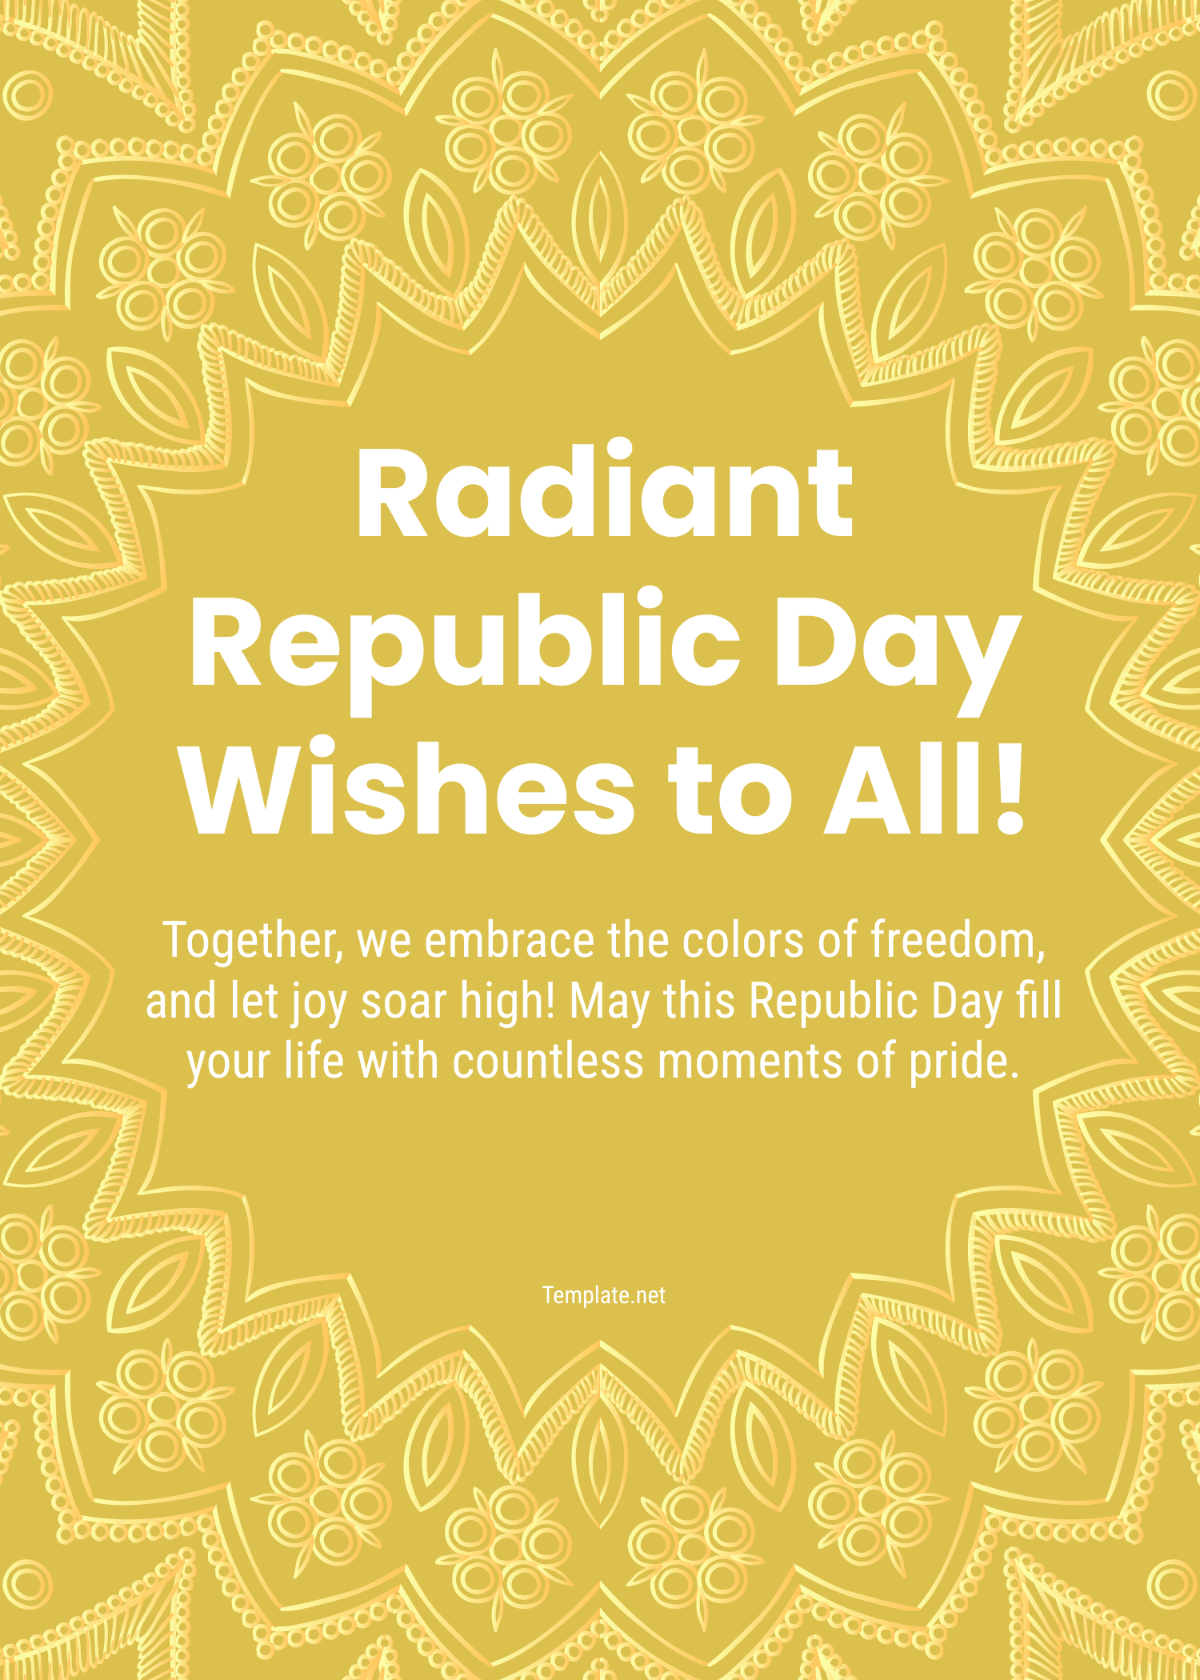 Free Republic Day Wishes Template